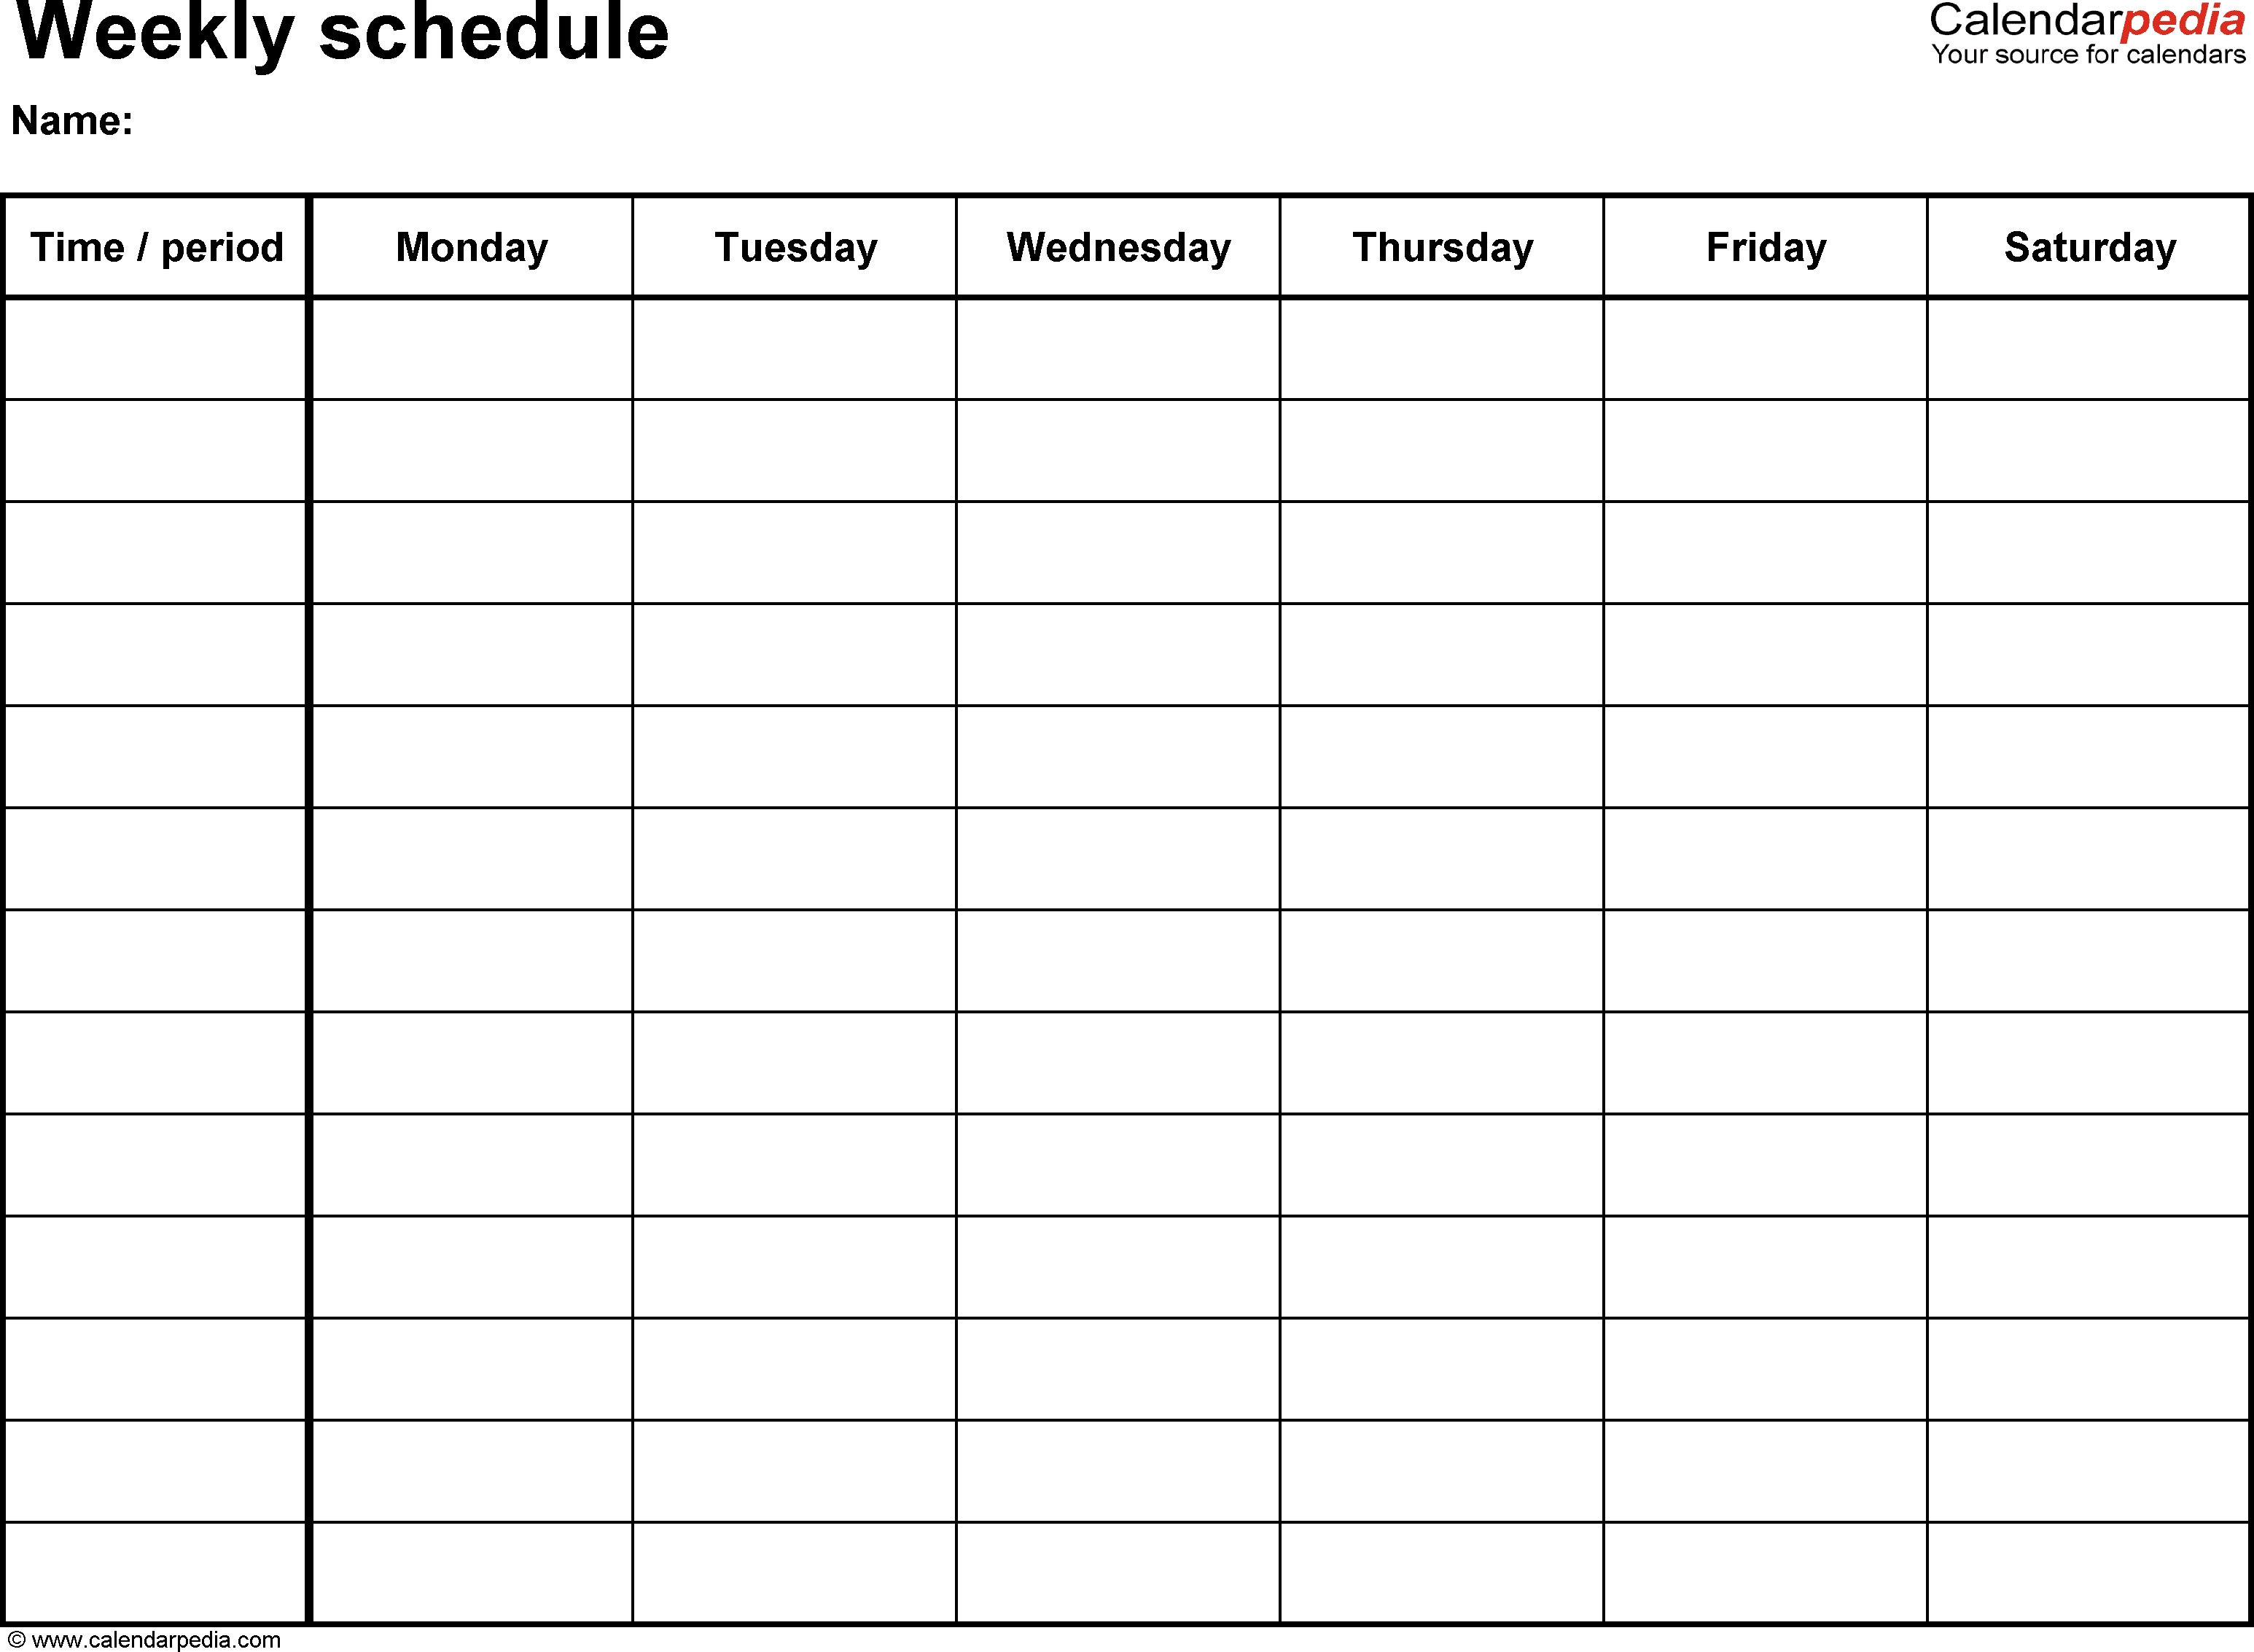 Free Weekly Schedule Templates For Word - 18 Templates pertaining to Monday - Friday Planner Template